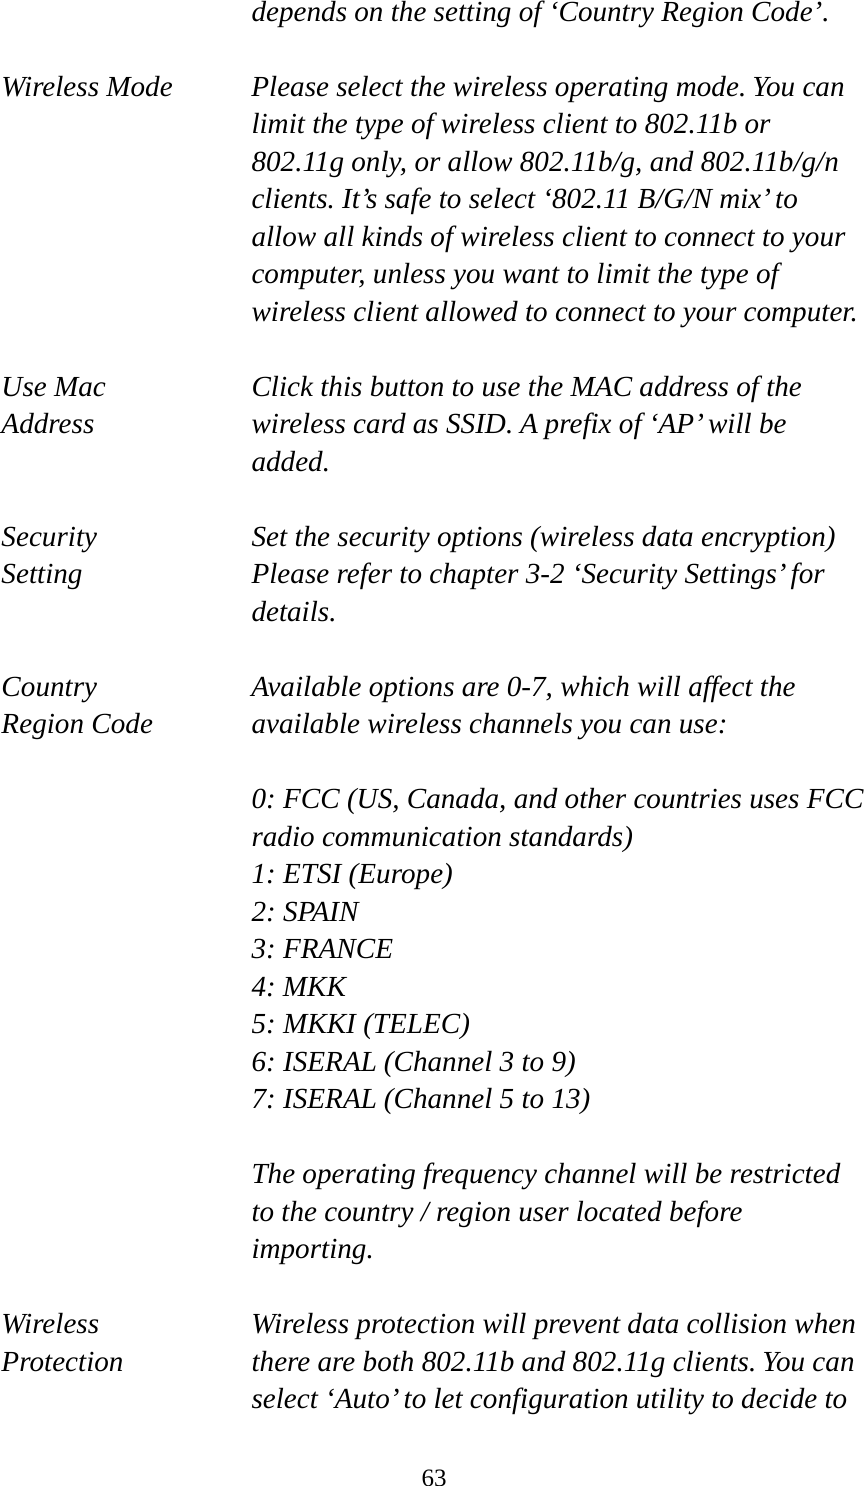  63depends on the setting of ‘Country Region Code’.  Wireless Mode  Please select the wireless operating mode. You can limit the type of wireless client to 802.11b or 802.11g only, or allow 802.11b/g, and 802.11b/g/n clients. It’s safe to select ‘802.11 B/G/N mix’ to allow all kinds of wireless client to connect to your computer, unless you want to limit the type of wireless client allowed to connect to your computer.  Use Mac    Click this button to use the MAC address of the Address  wireless card as SSID. A prefix of ‘AP’ will be added.  Security  Set the security options (wireless data encryption)   Setting  Please refer to chapter 3-2 ‘Security Settings’ for details.  Country  Available options are 0-7, which will affect the Region Code  available wireless channels you can use:  0: FCC (US, Canada, and other countries uses FCC radio communication standards) 1: ETSI (Europe) 2: SPAIN 3: FRANCE 4: MKK 5: MKKI (TELEC) 6: ISERAL (Channel 3 to 9) 7: ISERAL (Channel 5 to 13)  The operating frequency channel will be restricted to the country / region user located before importing.  Wireless  Wireless protection will prevent data collision when   Protection  there are both 802.11b and 802.11g clients. You can select ‘Auto’ to let configuration utility to decide to 